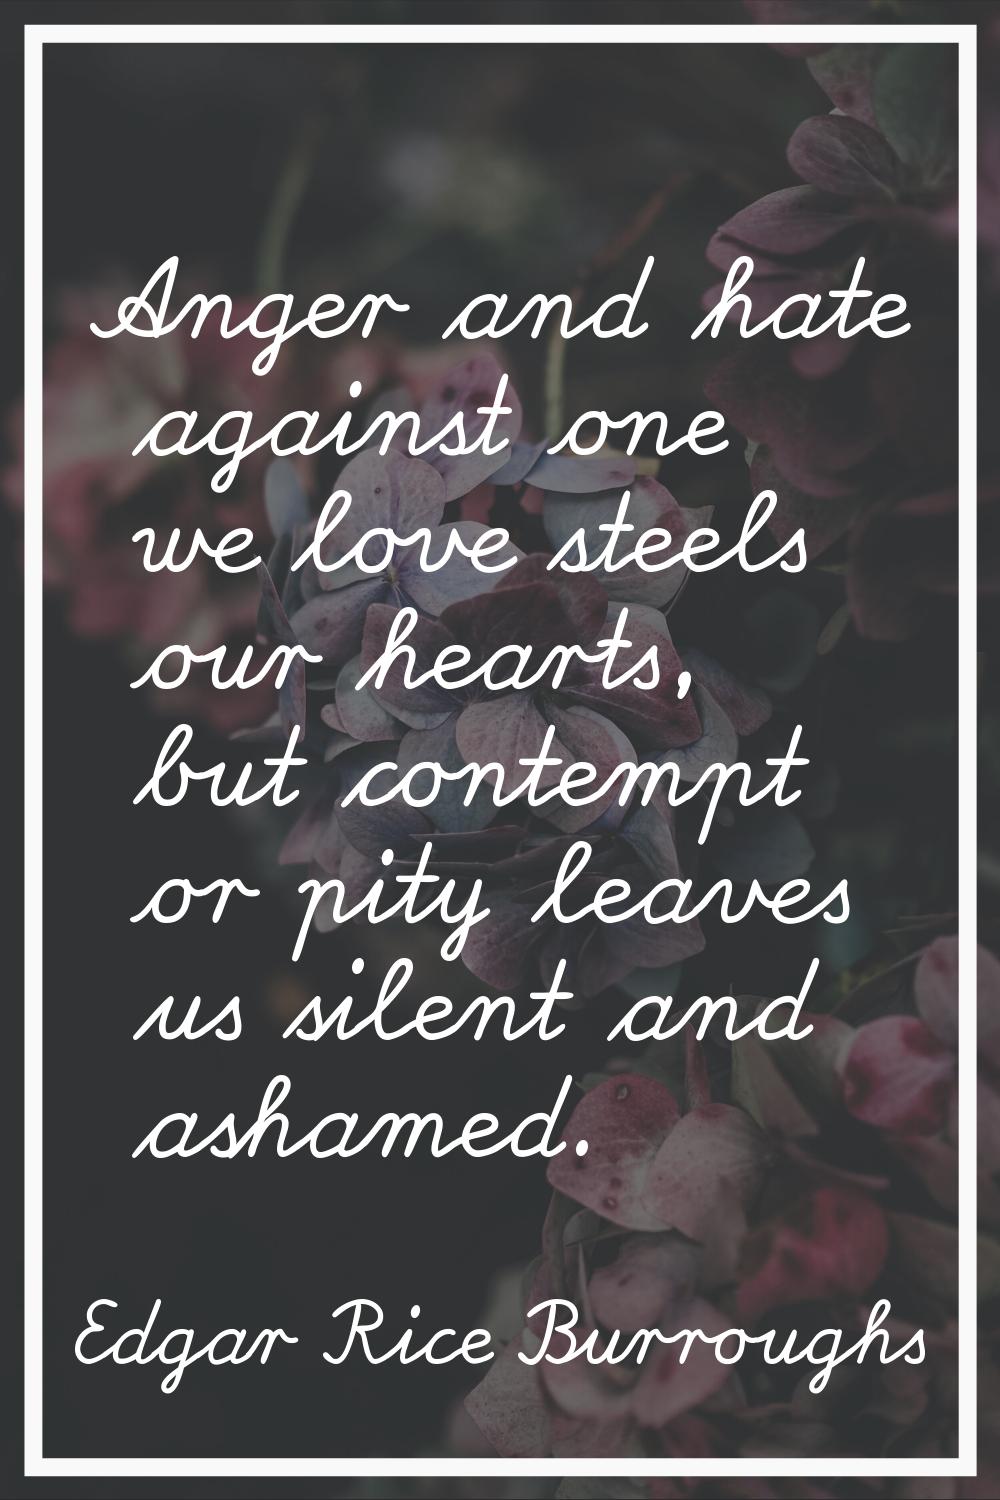 Anger and hate against one we love steels our hearts, but contempt or pity leaves us silent and ash